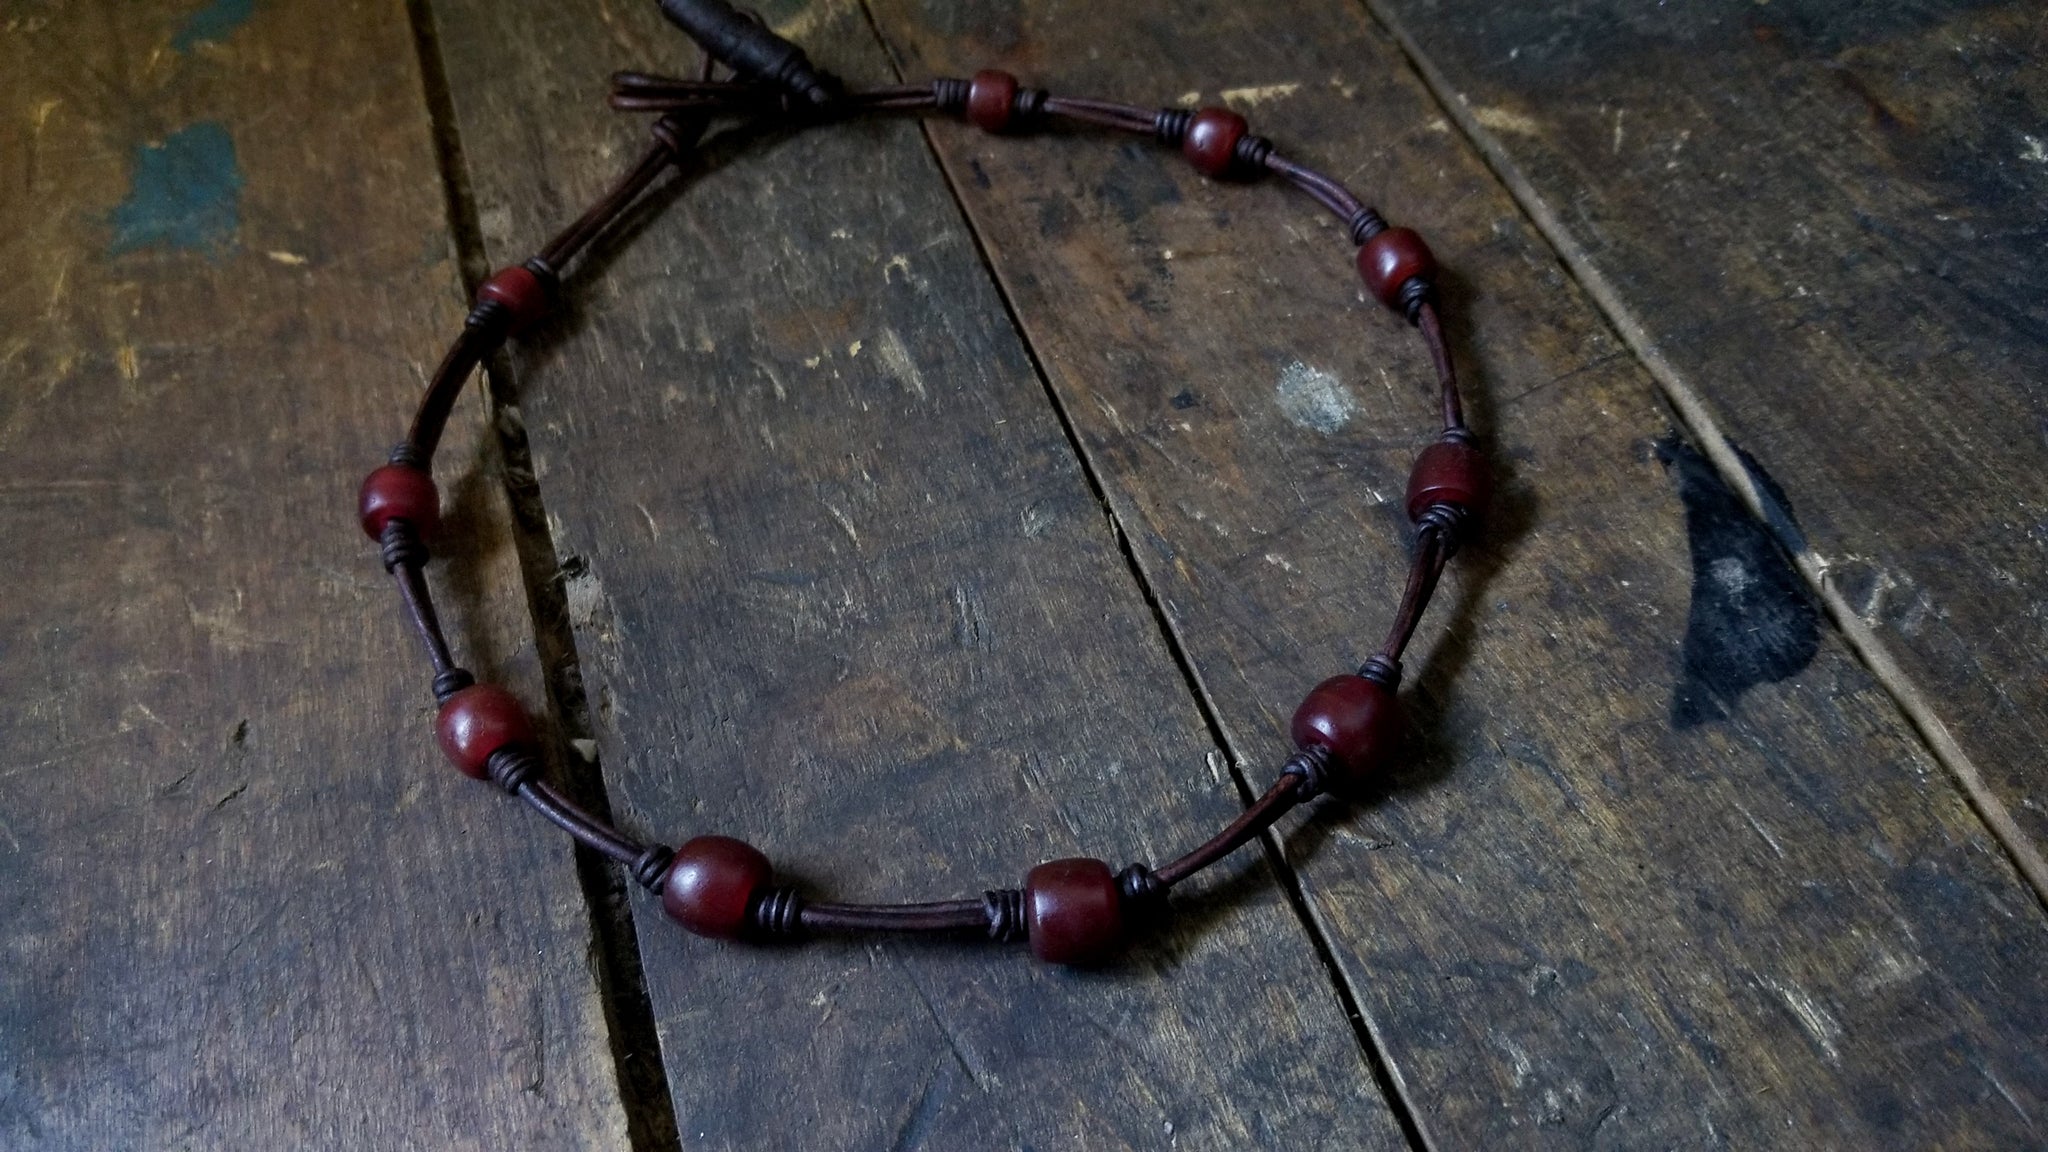 Chuma Leather Necklace; antique chocolate brown leather cord with mahogany Brown African Trade Beads, Bison Leather Toggle Button and Loop Clasp